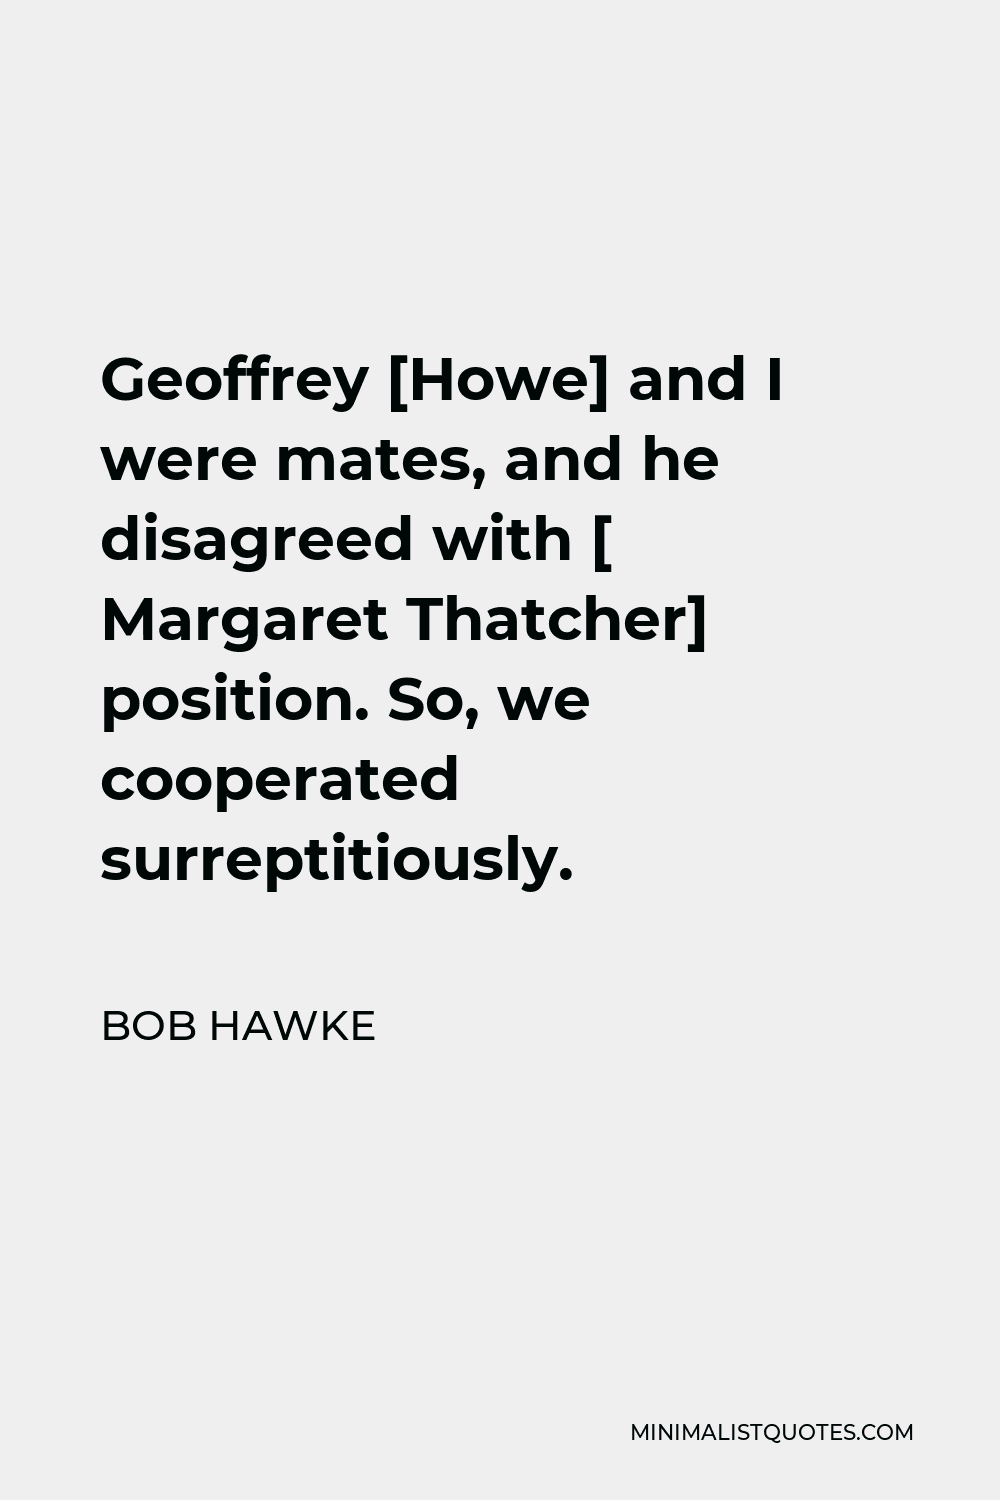 Bob Hawke Quote - Geoffrey [Howe] and I were mates, and he disagreed with [ Margaret Thatcher] position. So, we cooperated surreptitiously.